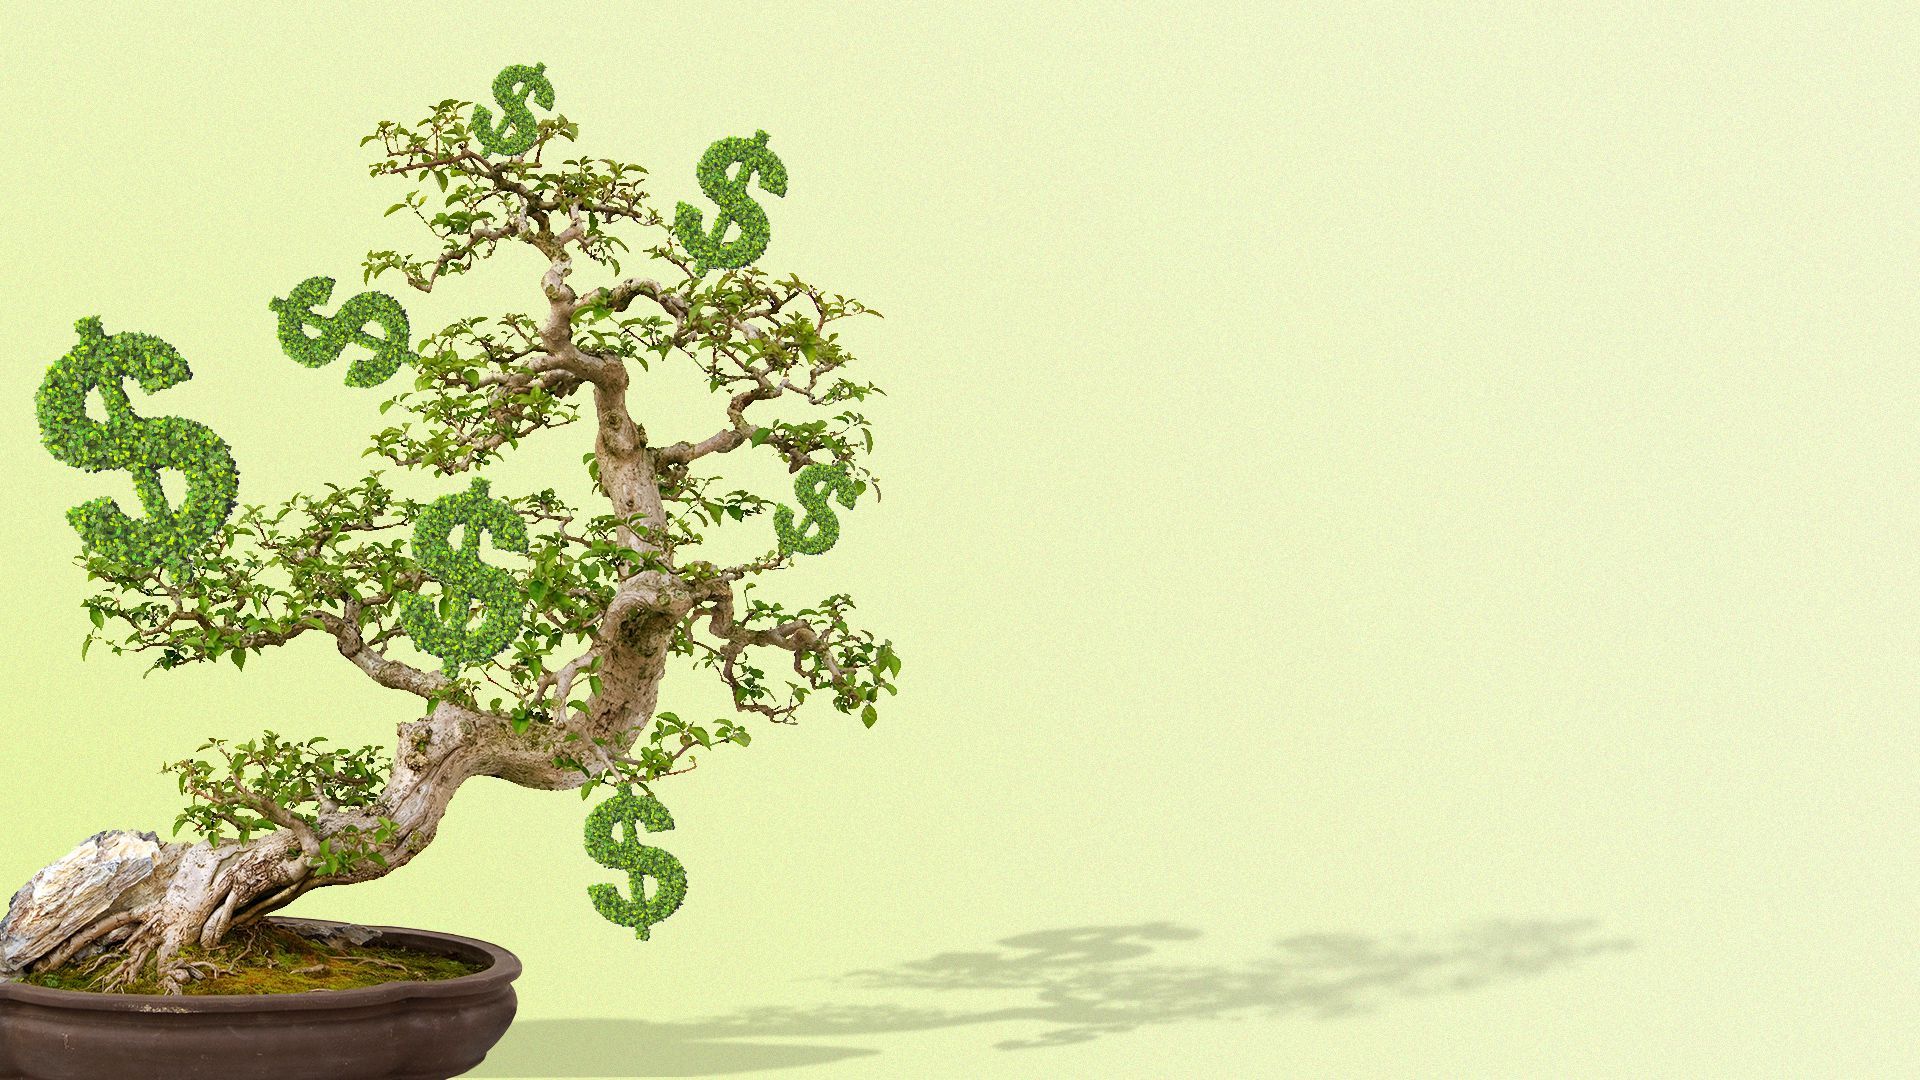 Illustration of a bonsai tree with dollar signs growing on it.